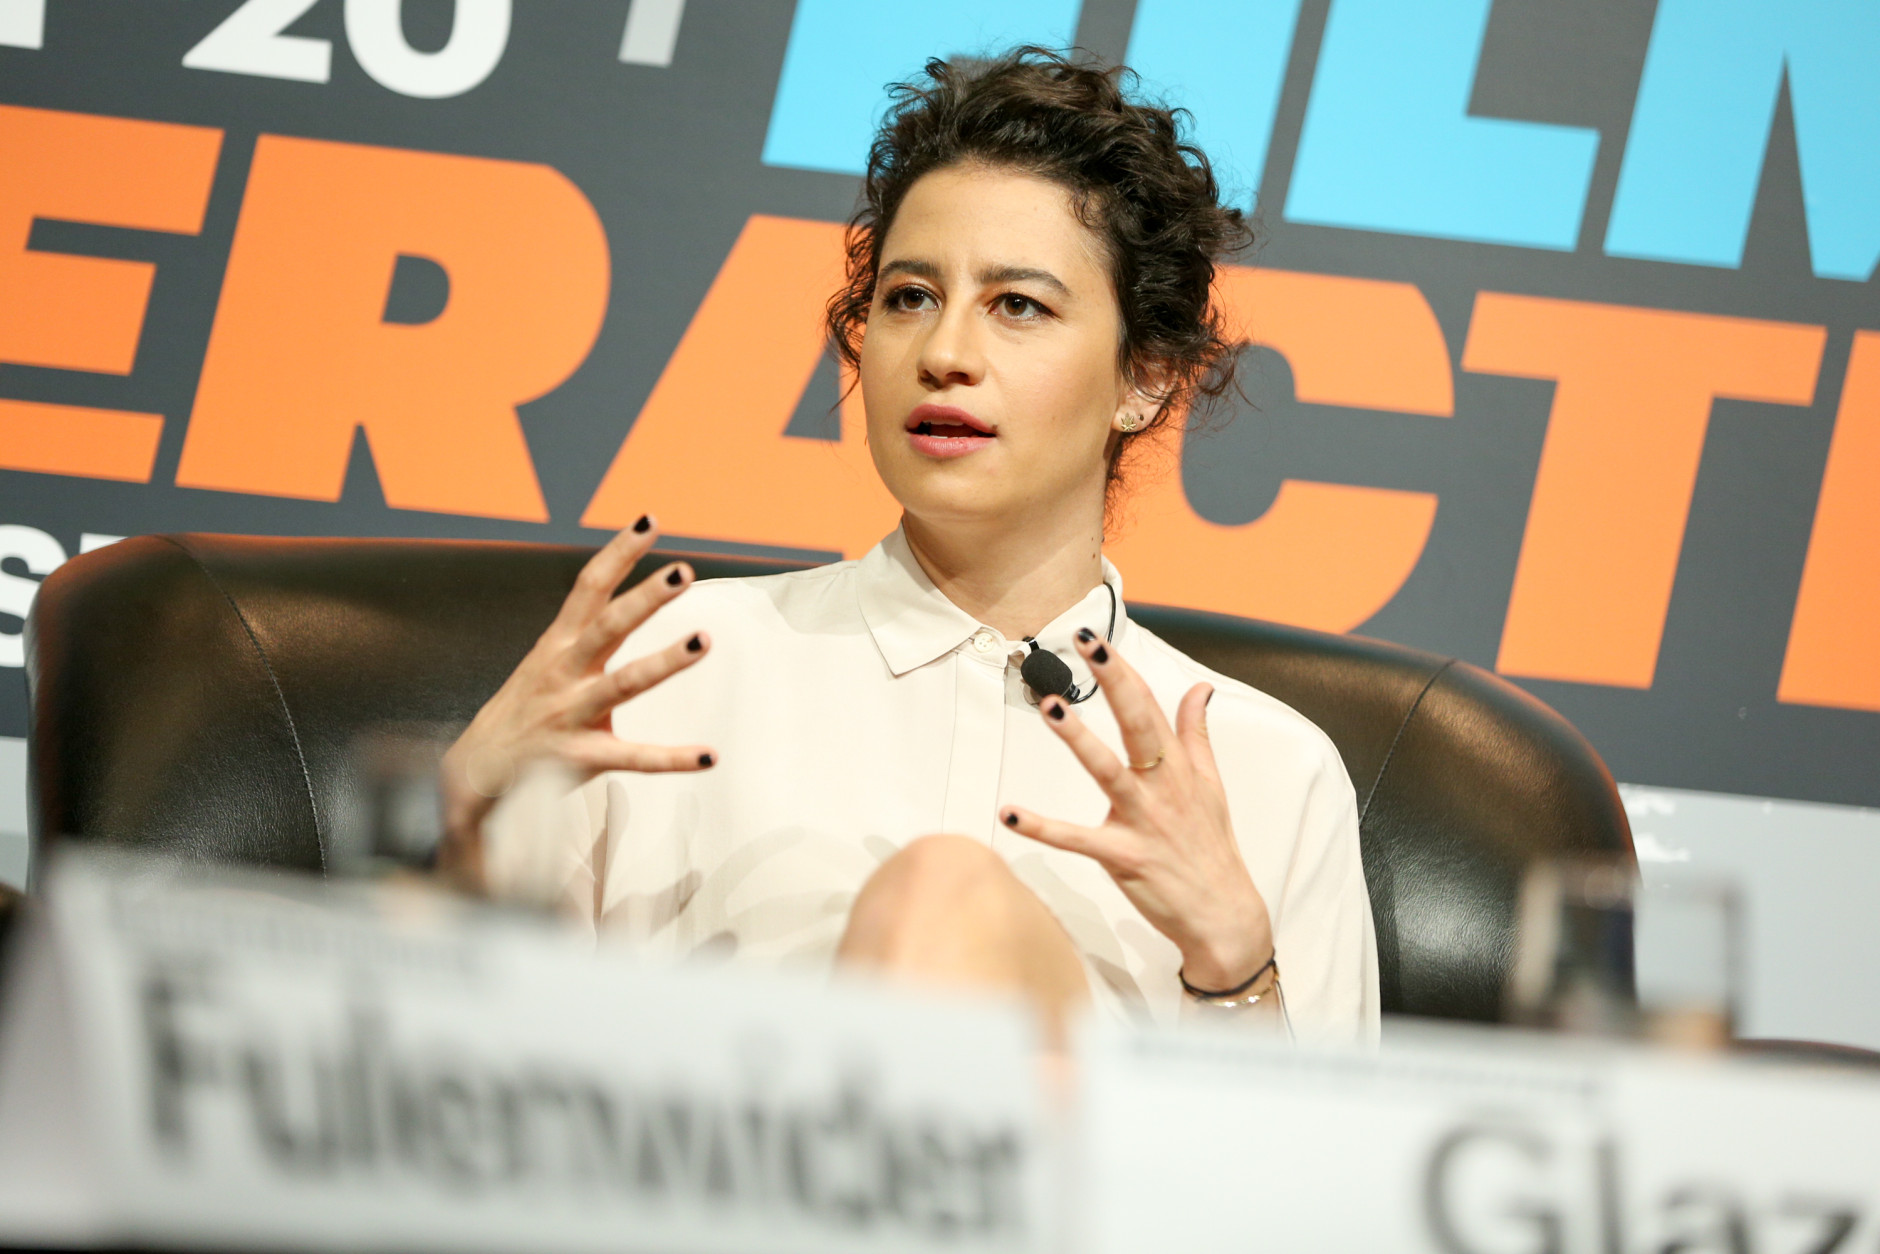 Ilana Glazer speaks at a panel discussion during South By Southwest at the Austin Convention Center on Saturday, March 12, 2016, in Austin, Texas. (Photo by Rich Fury/Invision/AP)